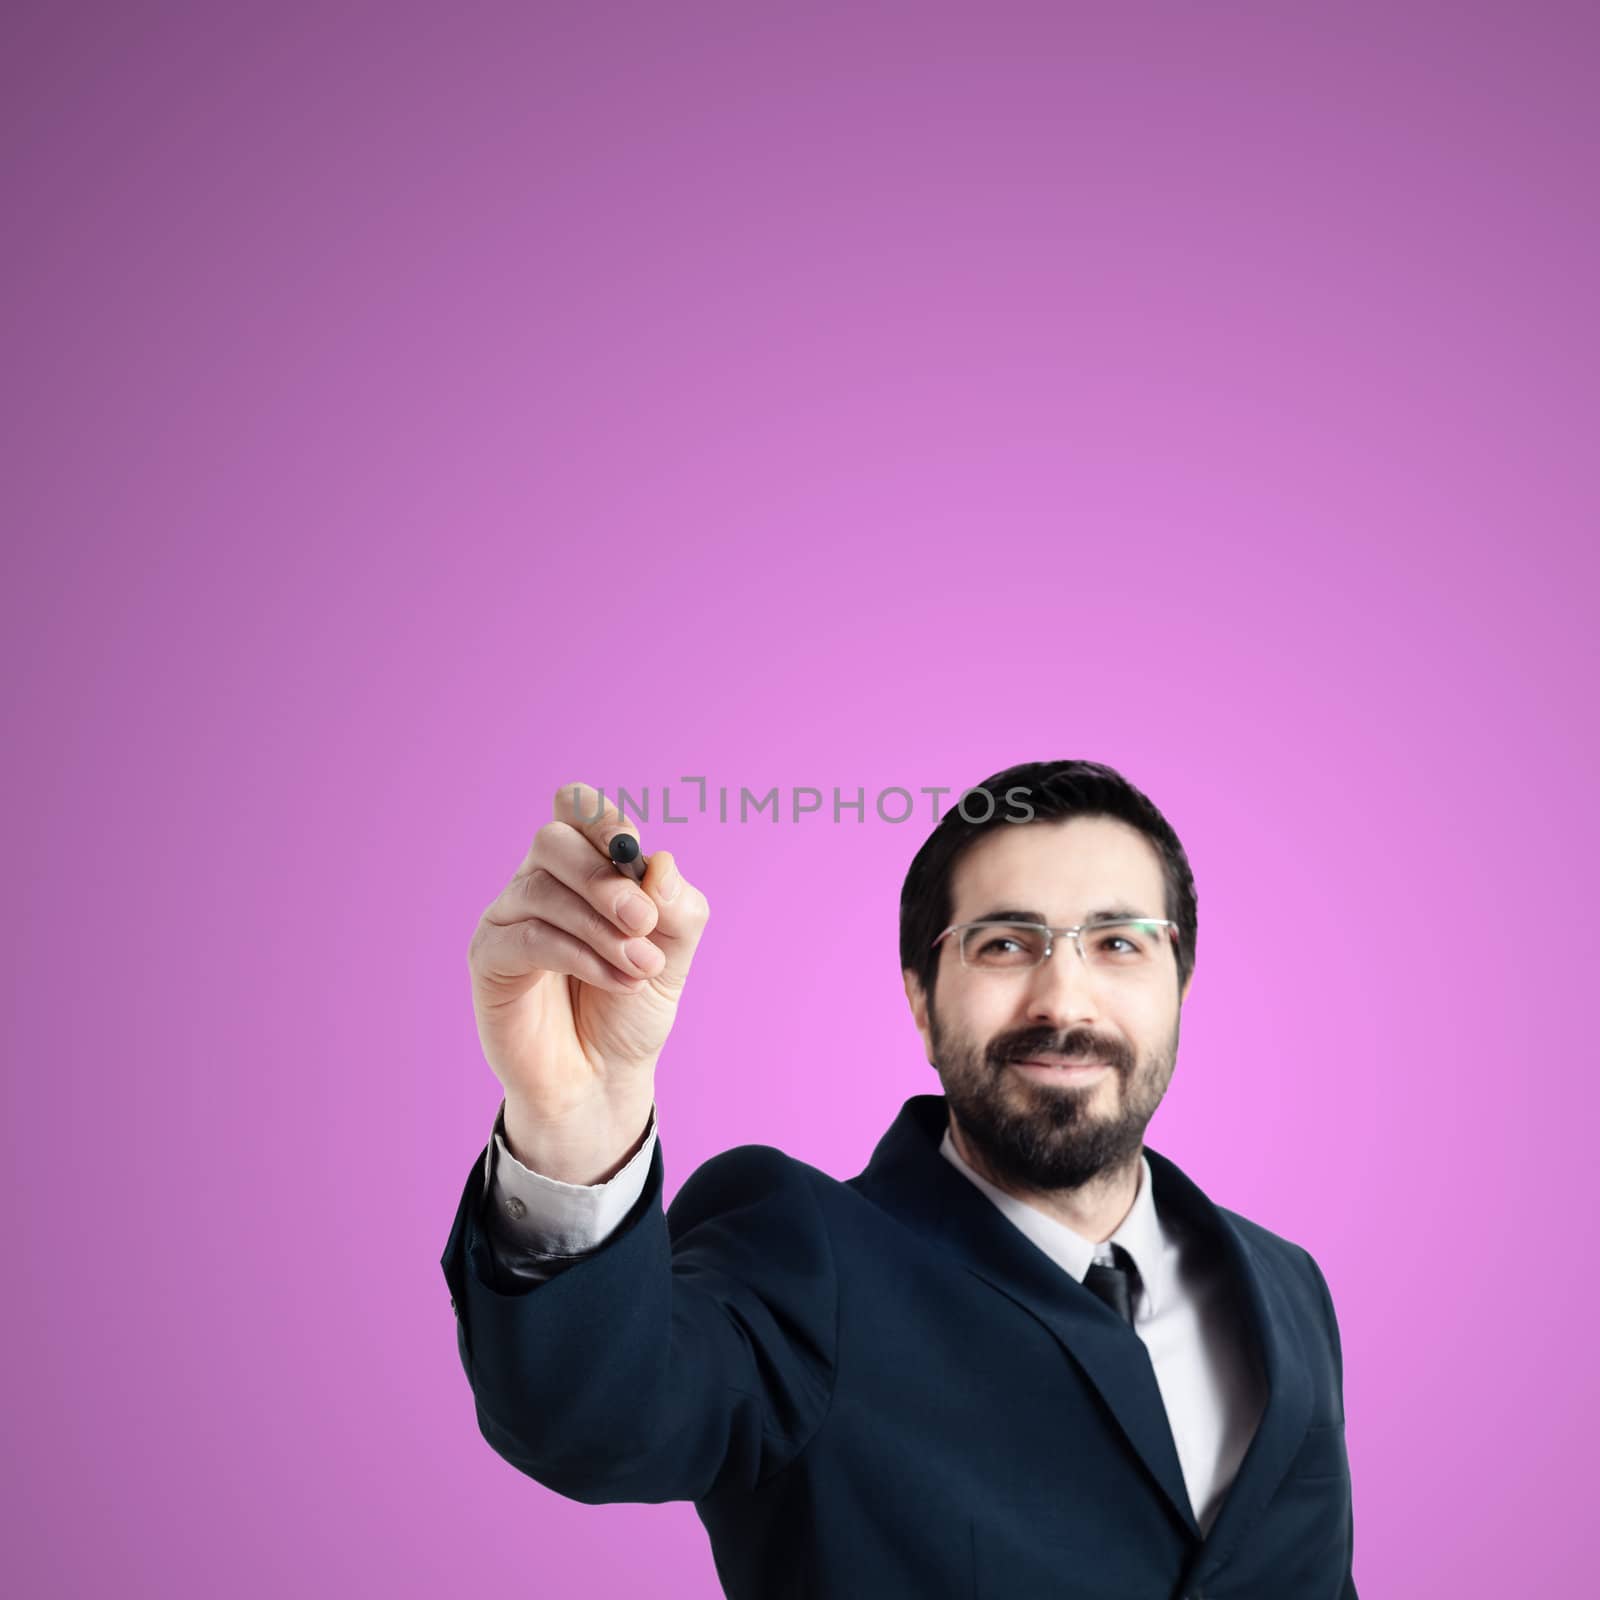 business man writing on imaginary screen on pink background